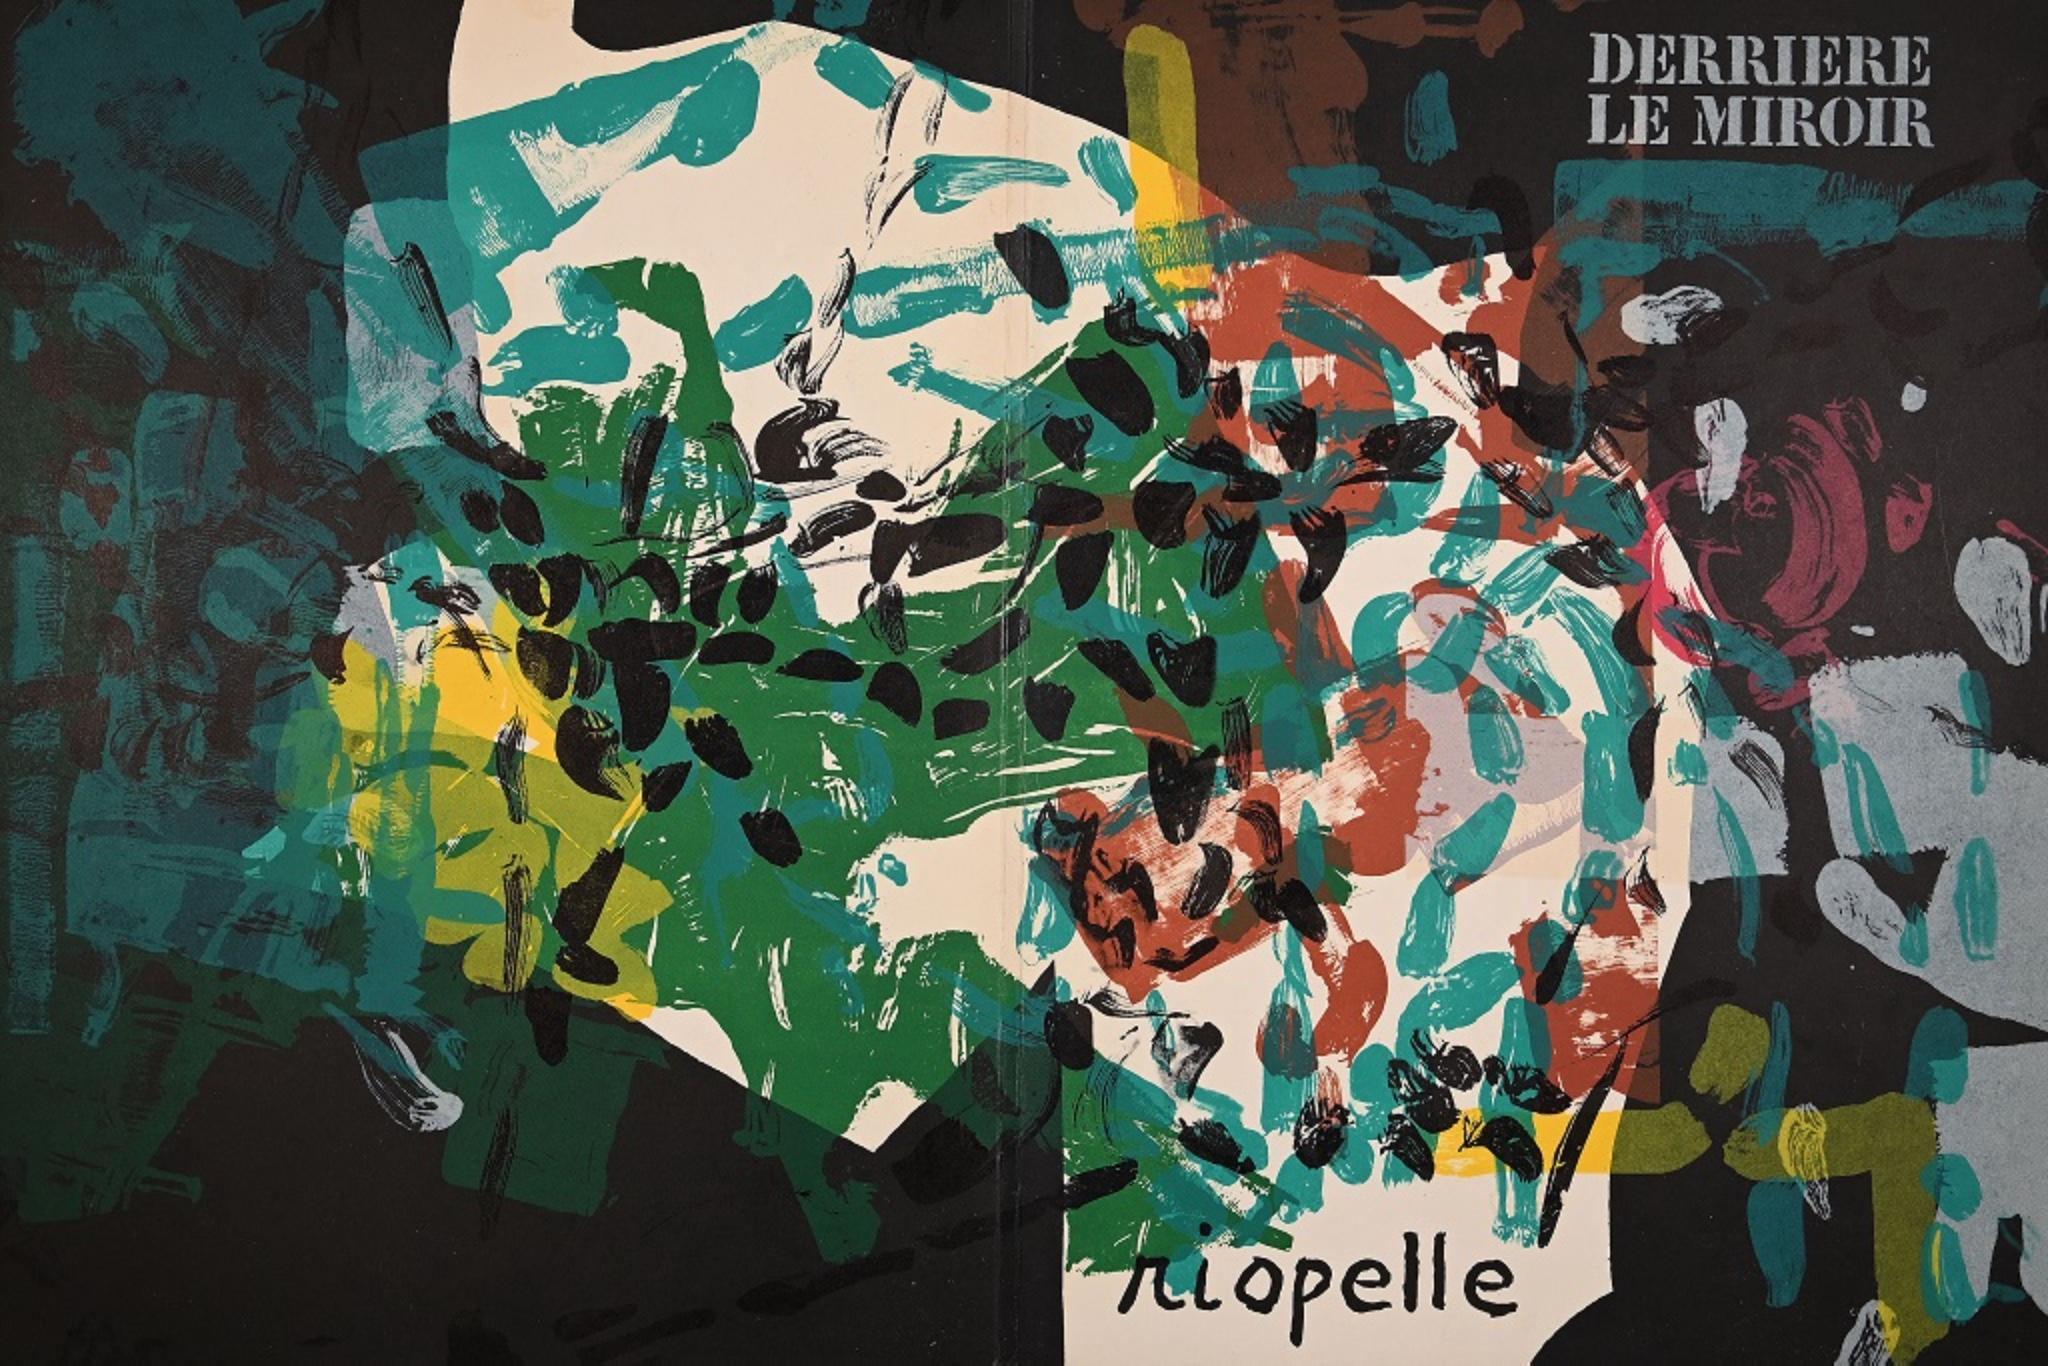 Jean-Paul Riopelle Abstract Print - Cover from Derriere Le Miroir - Original Lithograph by JP. Riopelle - 1968